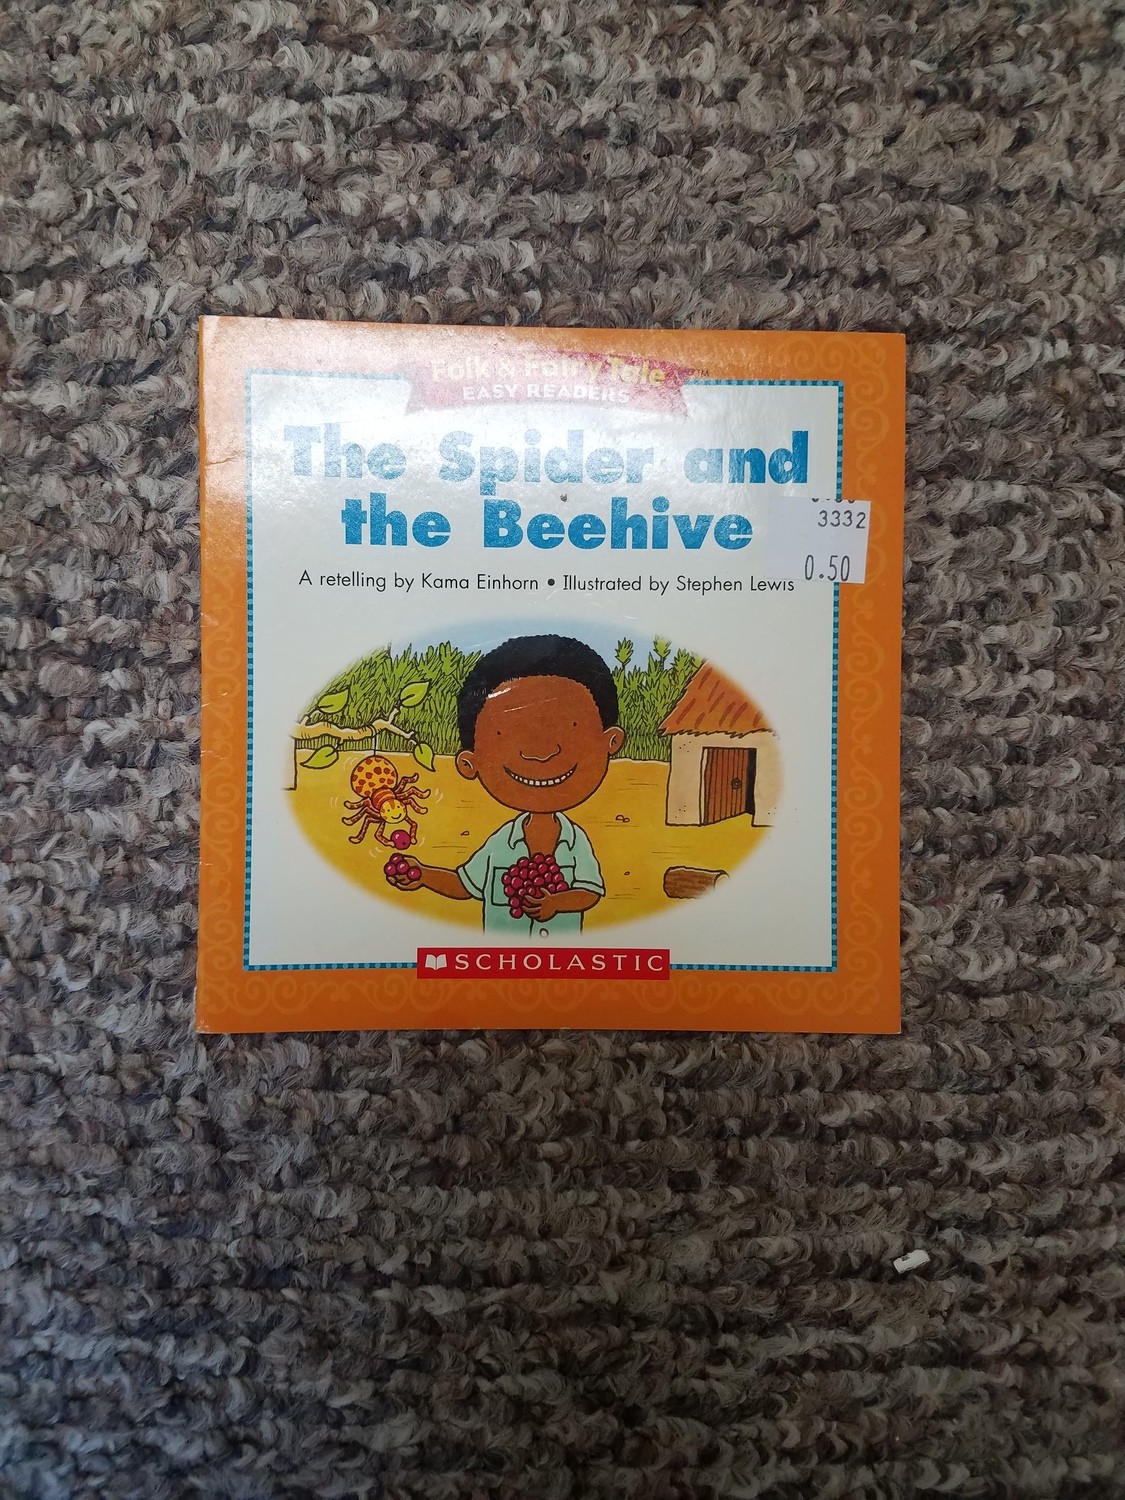 The Spider and the Beehive by Kama Einhorn